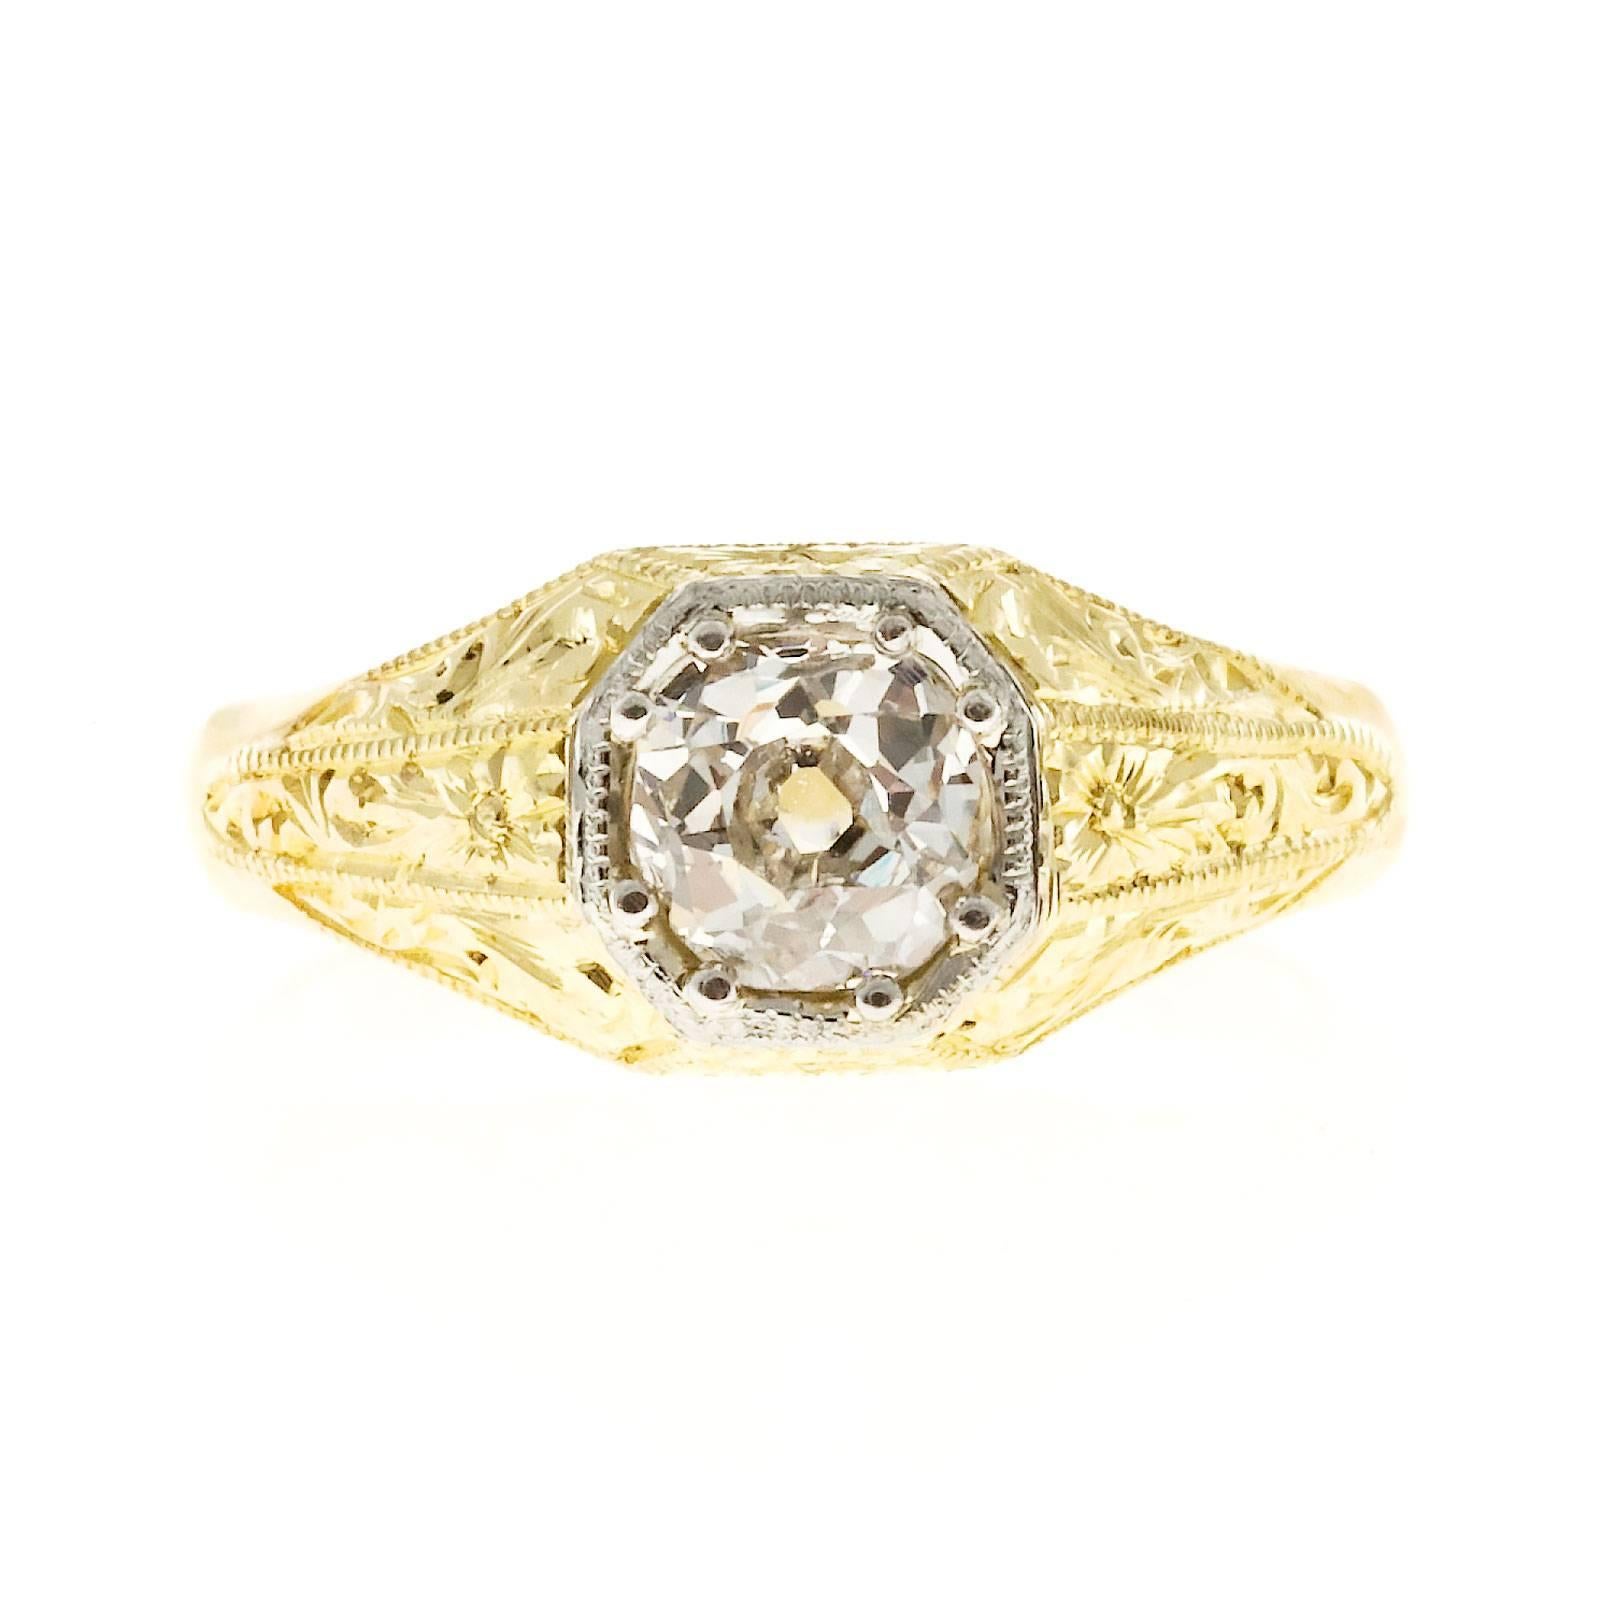 1880’s handmade ring in 18k yellow gold with a white gold 8 sided top. The original old mine brilliant cut diamond has fantastic sparkle with a raised crown and small table. crt

1 old mine brilliant cut diamond, approx. total weight .81cts, H –